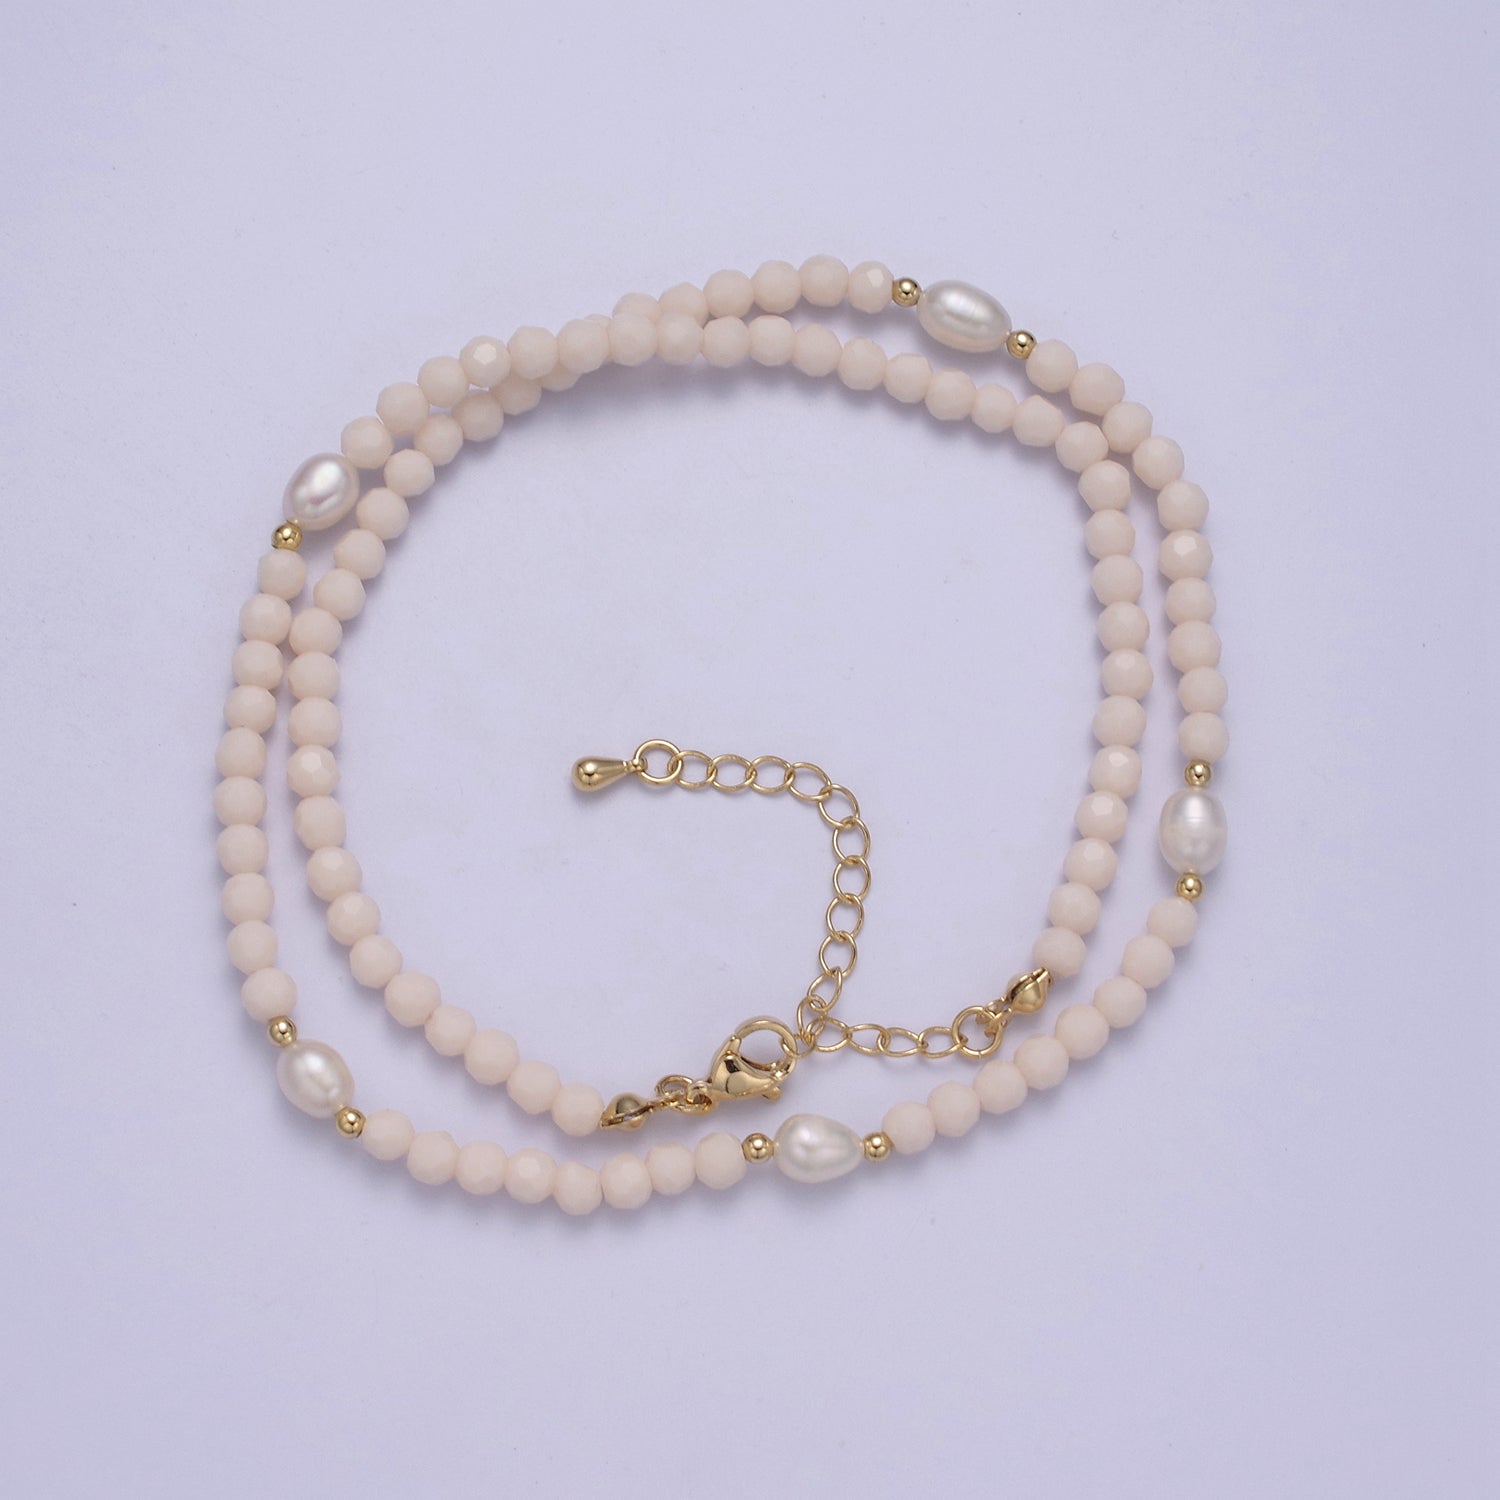 Pearl with Off White Glass Beaded Necklace, White Faceted Rondell Beads Necklace WA-608 - DLUXCA